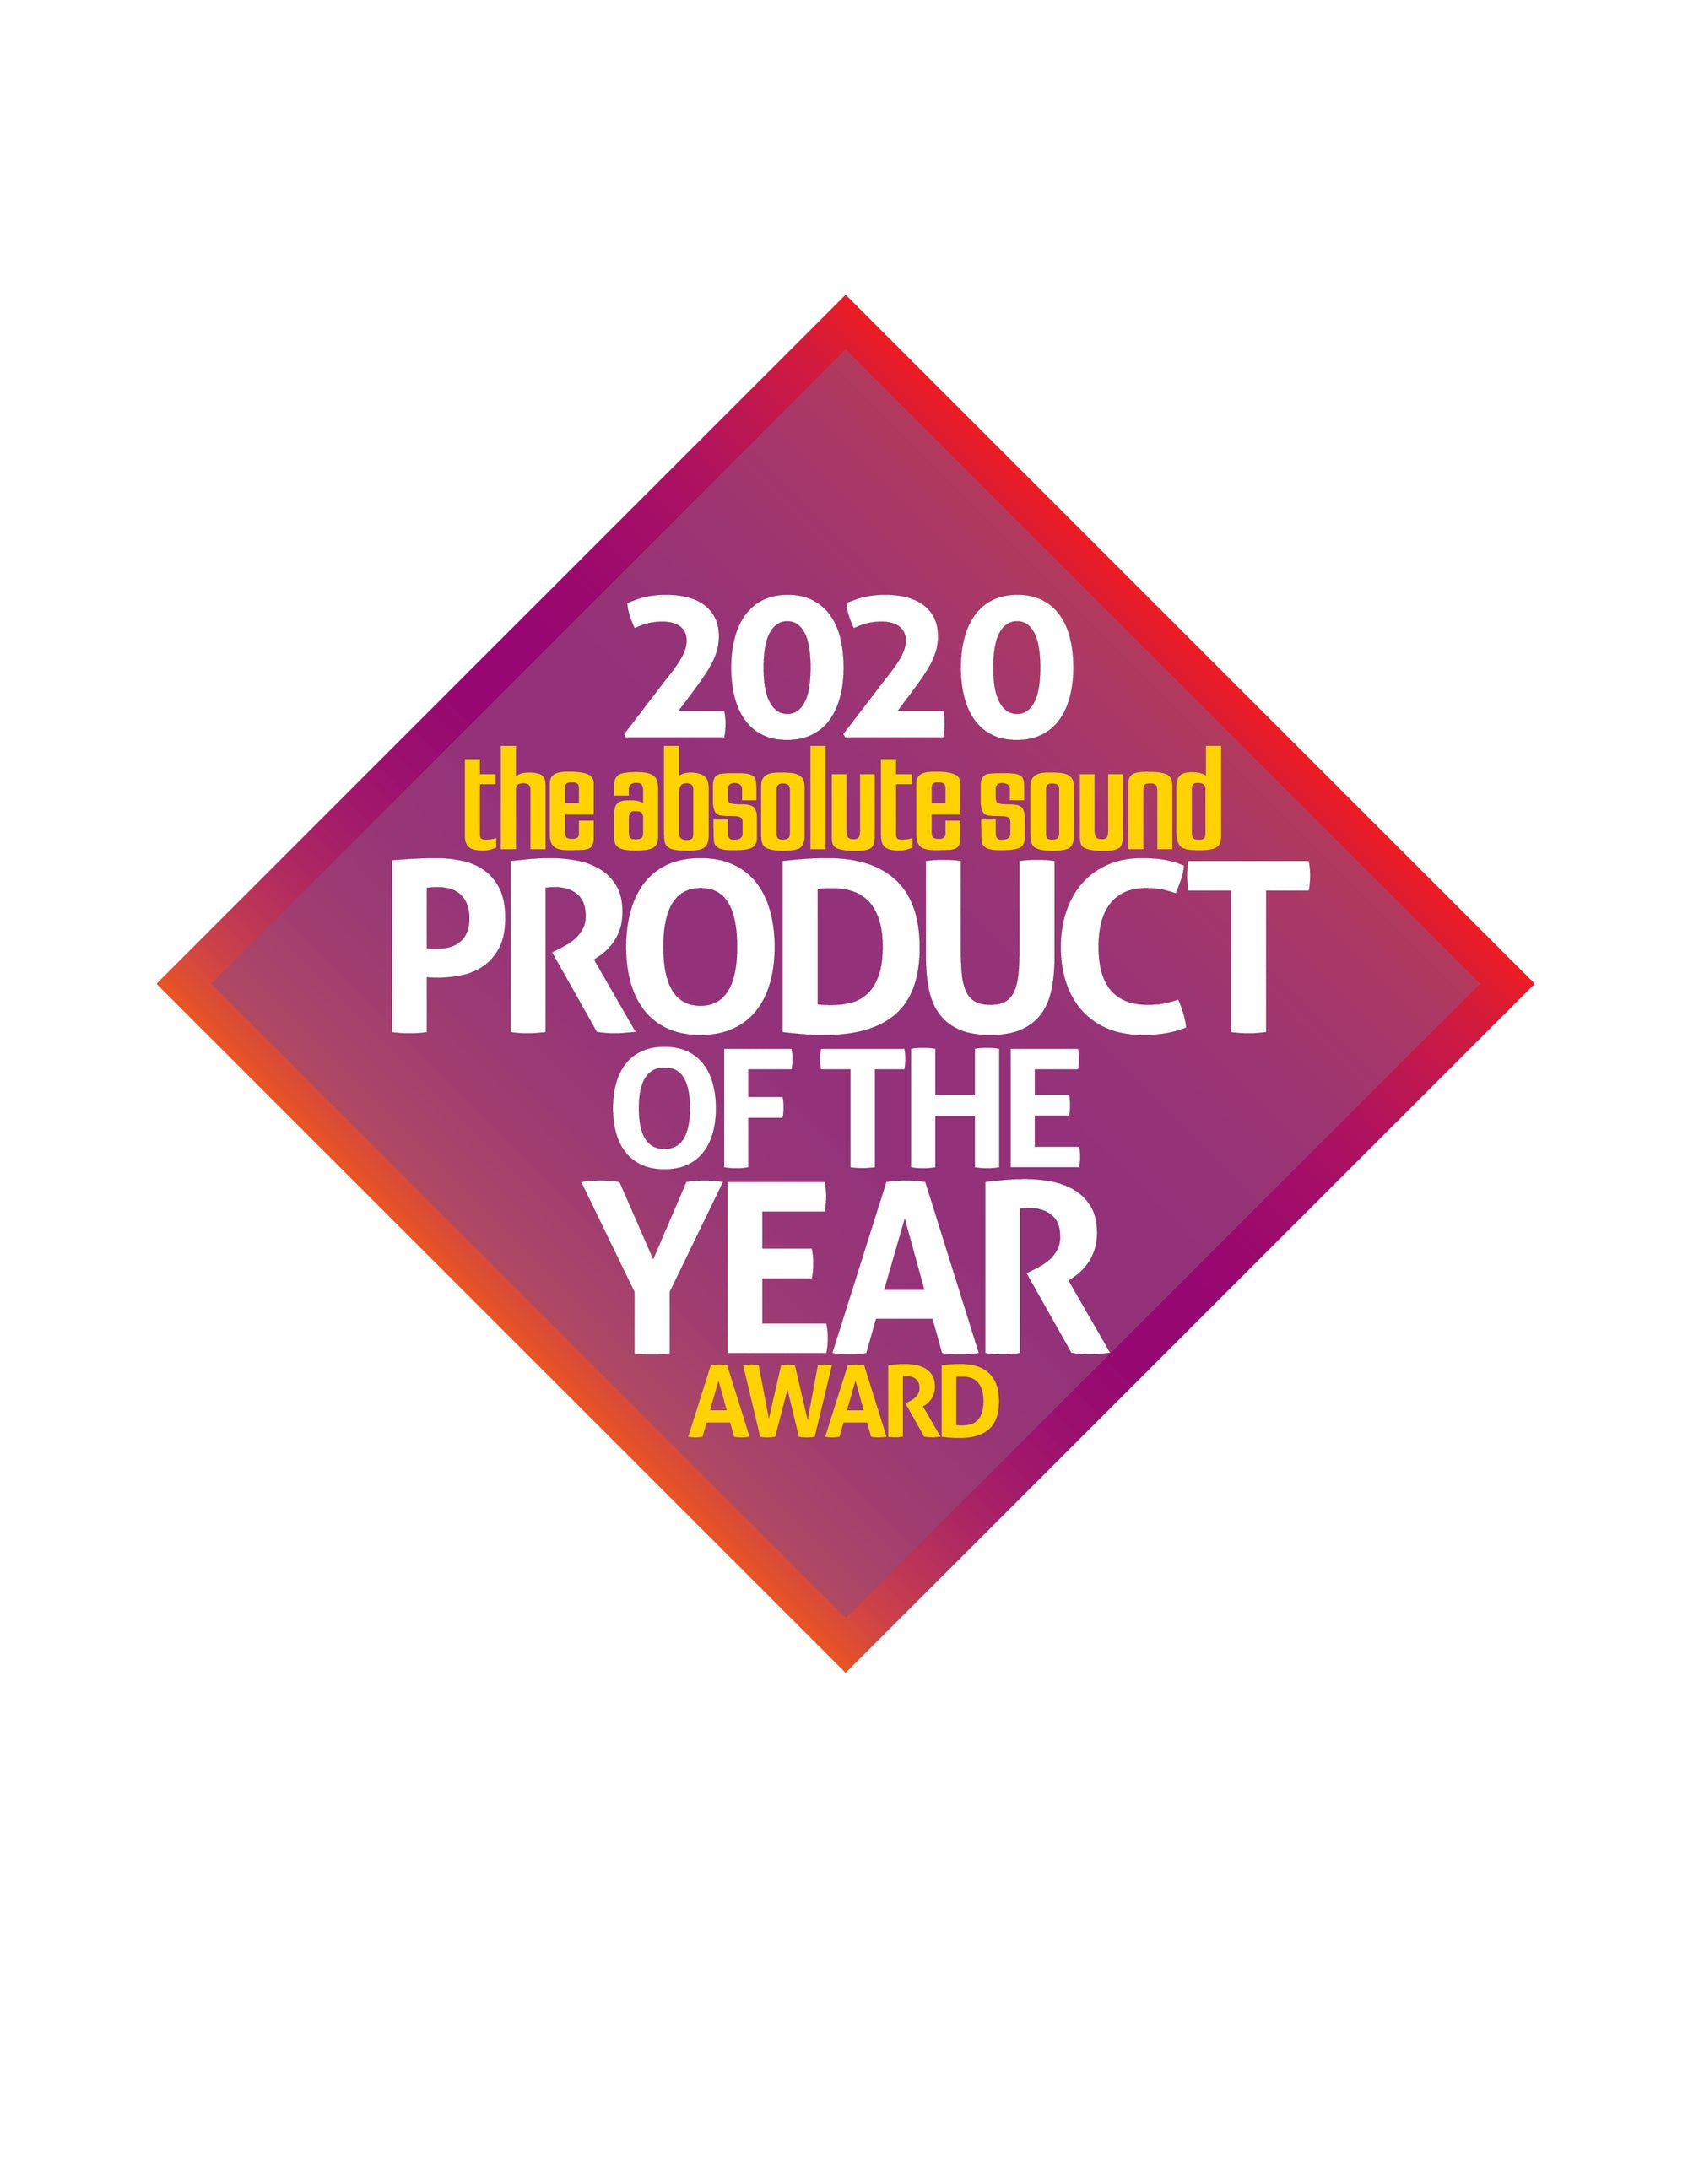 LA4 Award - 2020 Product of the Year - The Absolute Sound